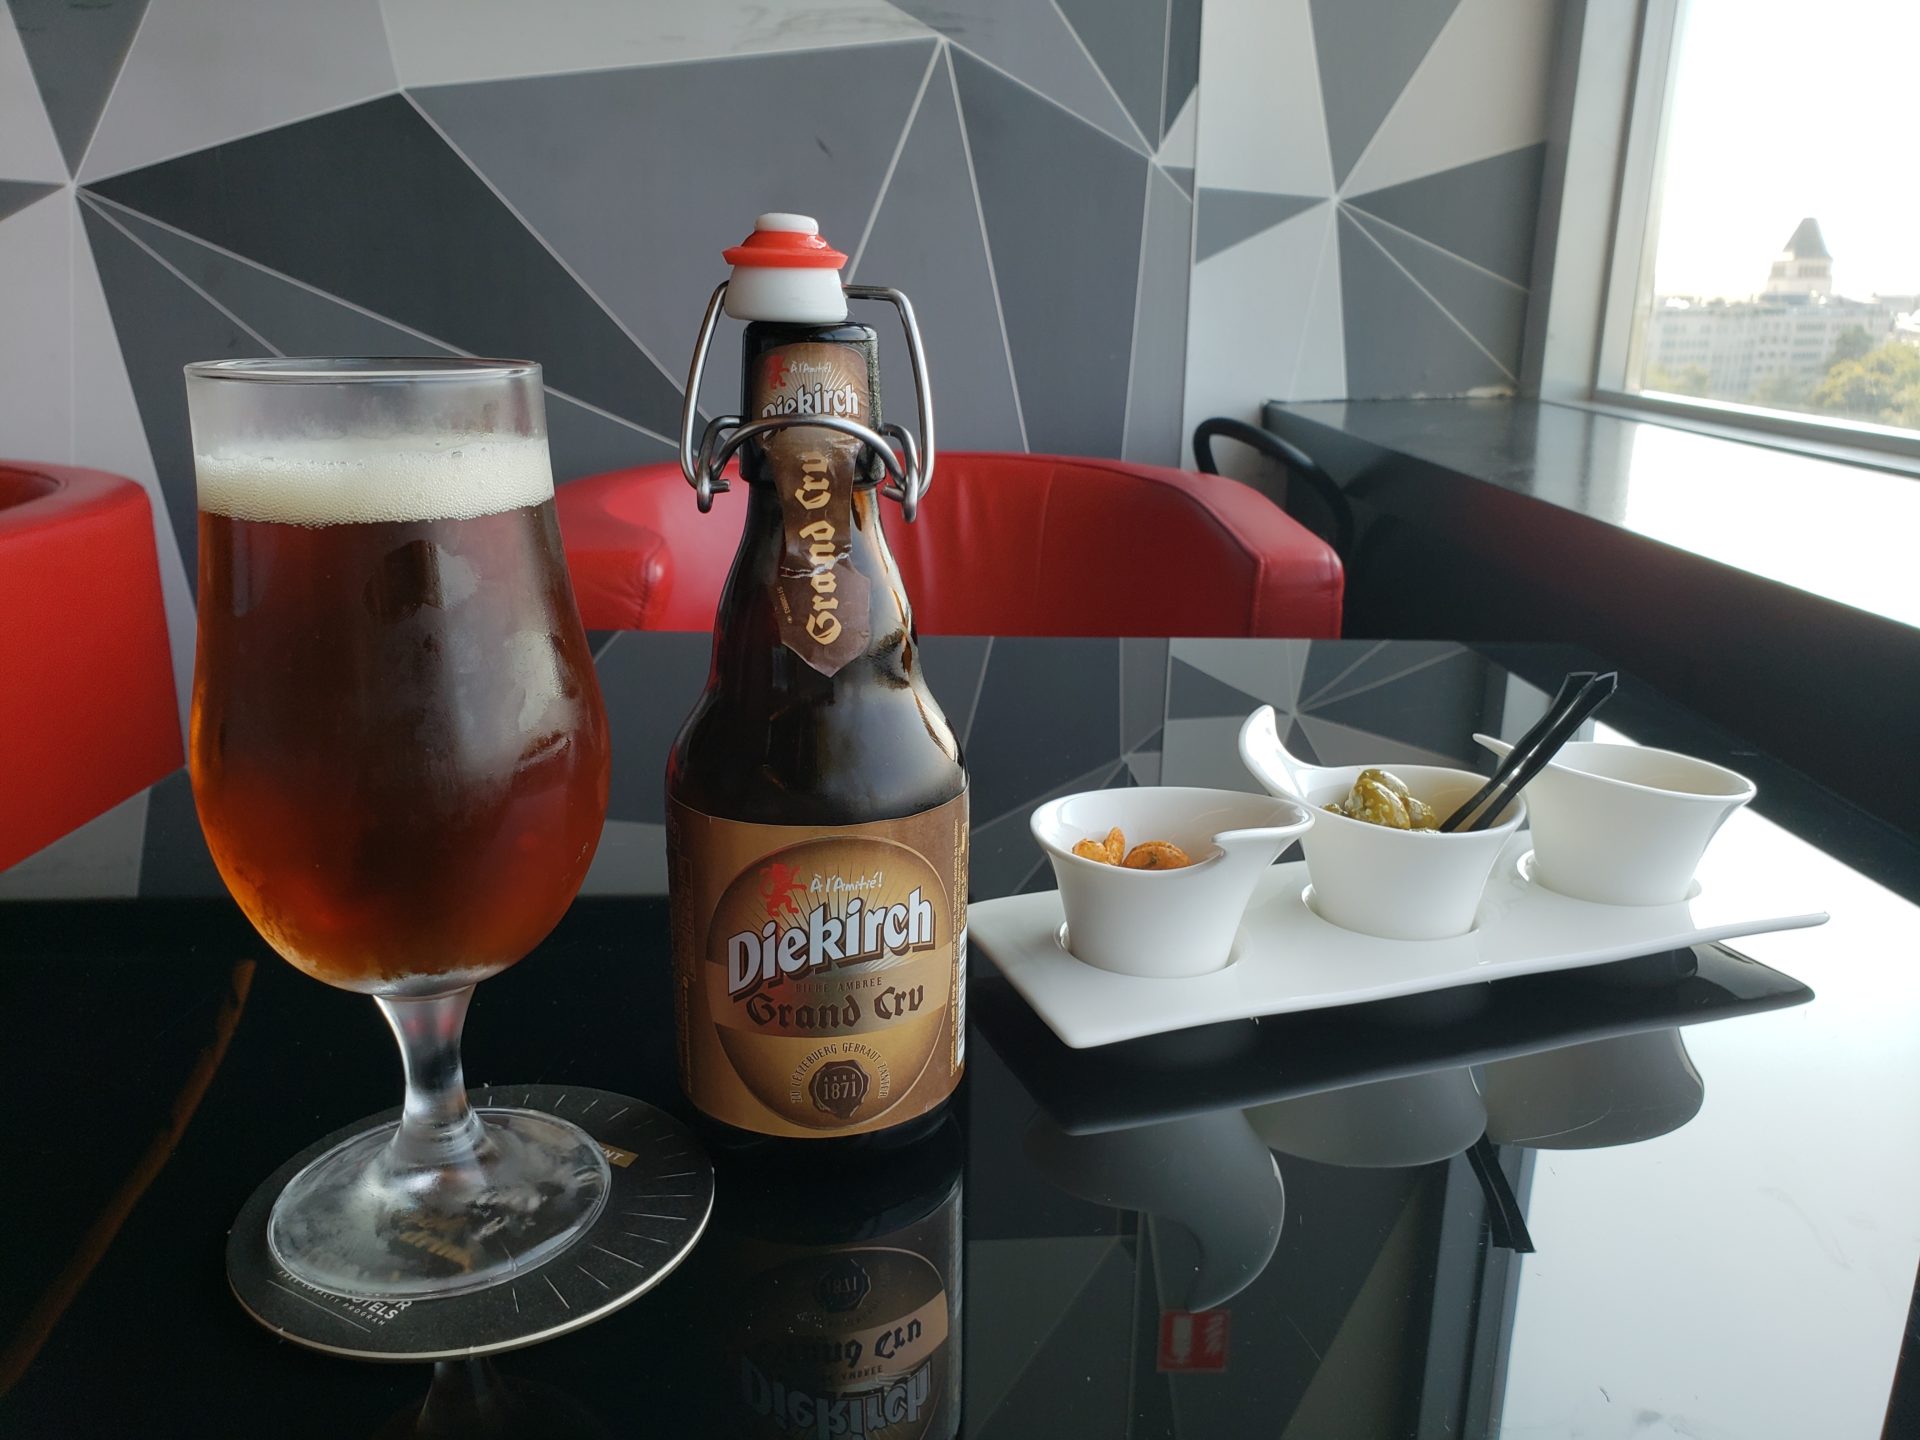 a glass of beer and a bottle of beer on a table